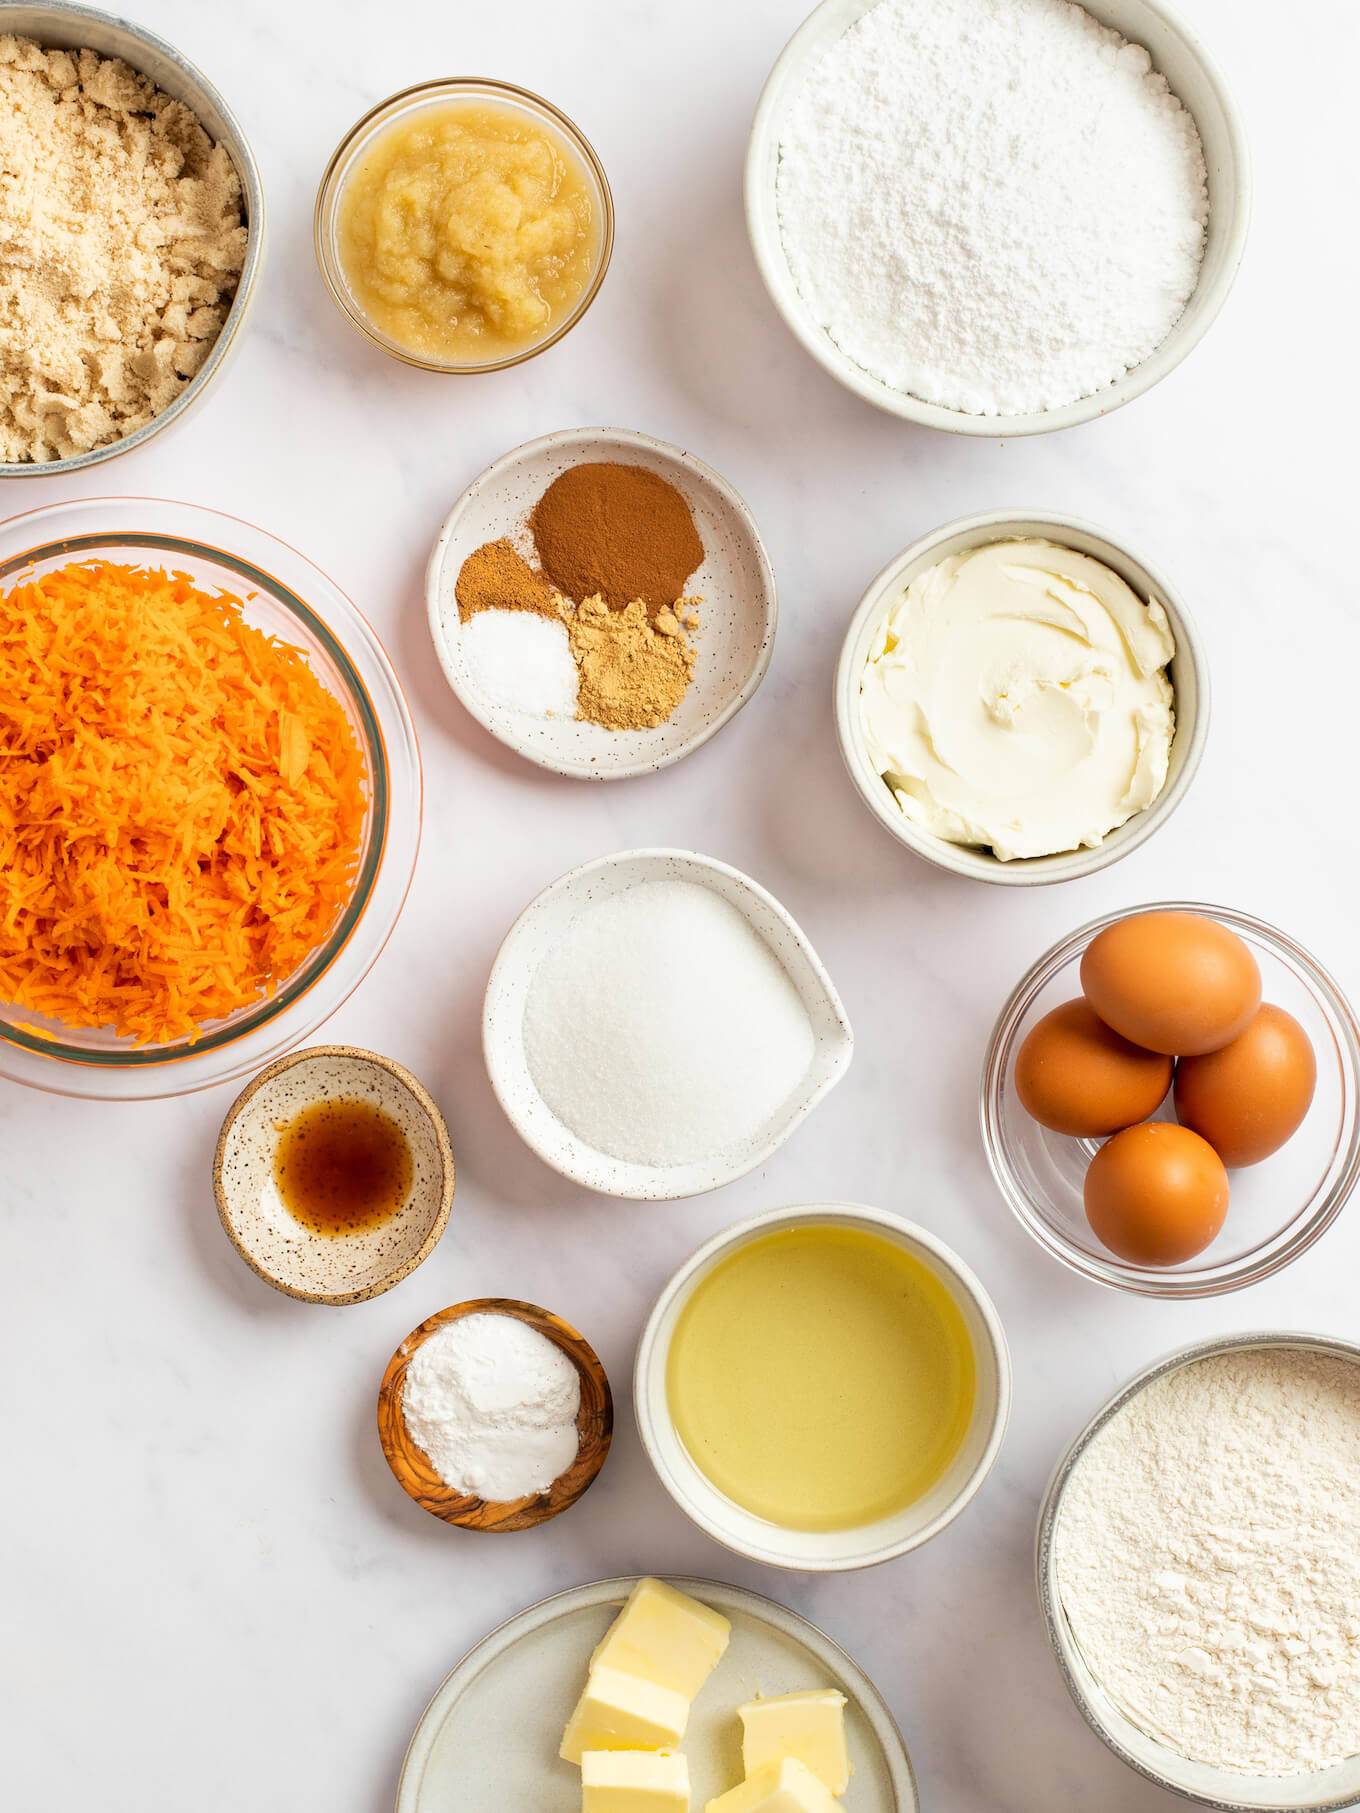 An overhead view of the ingredients for carrot cake on top of a marble surface.